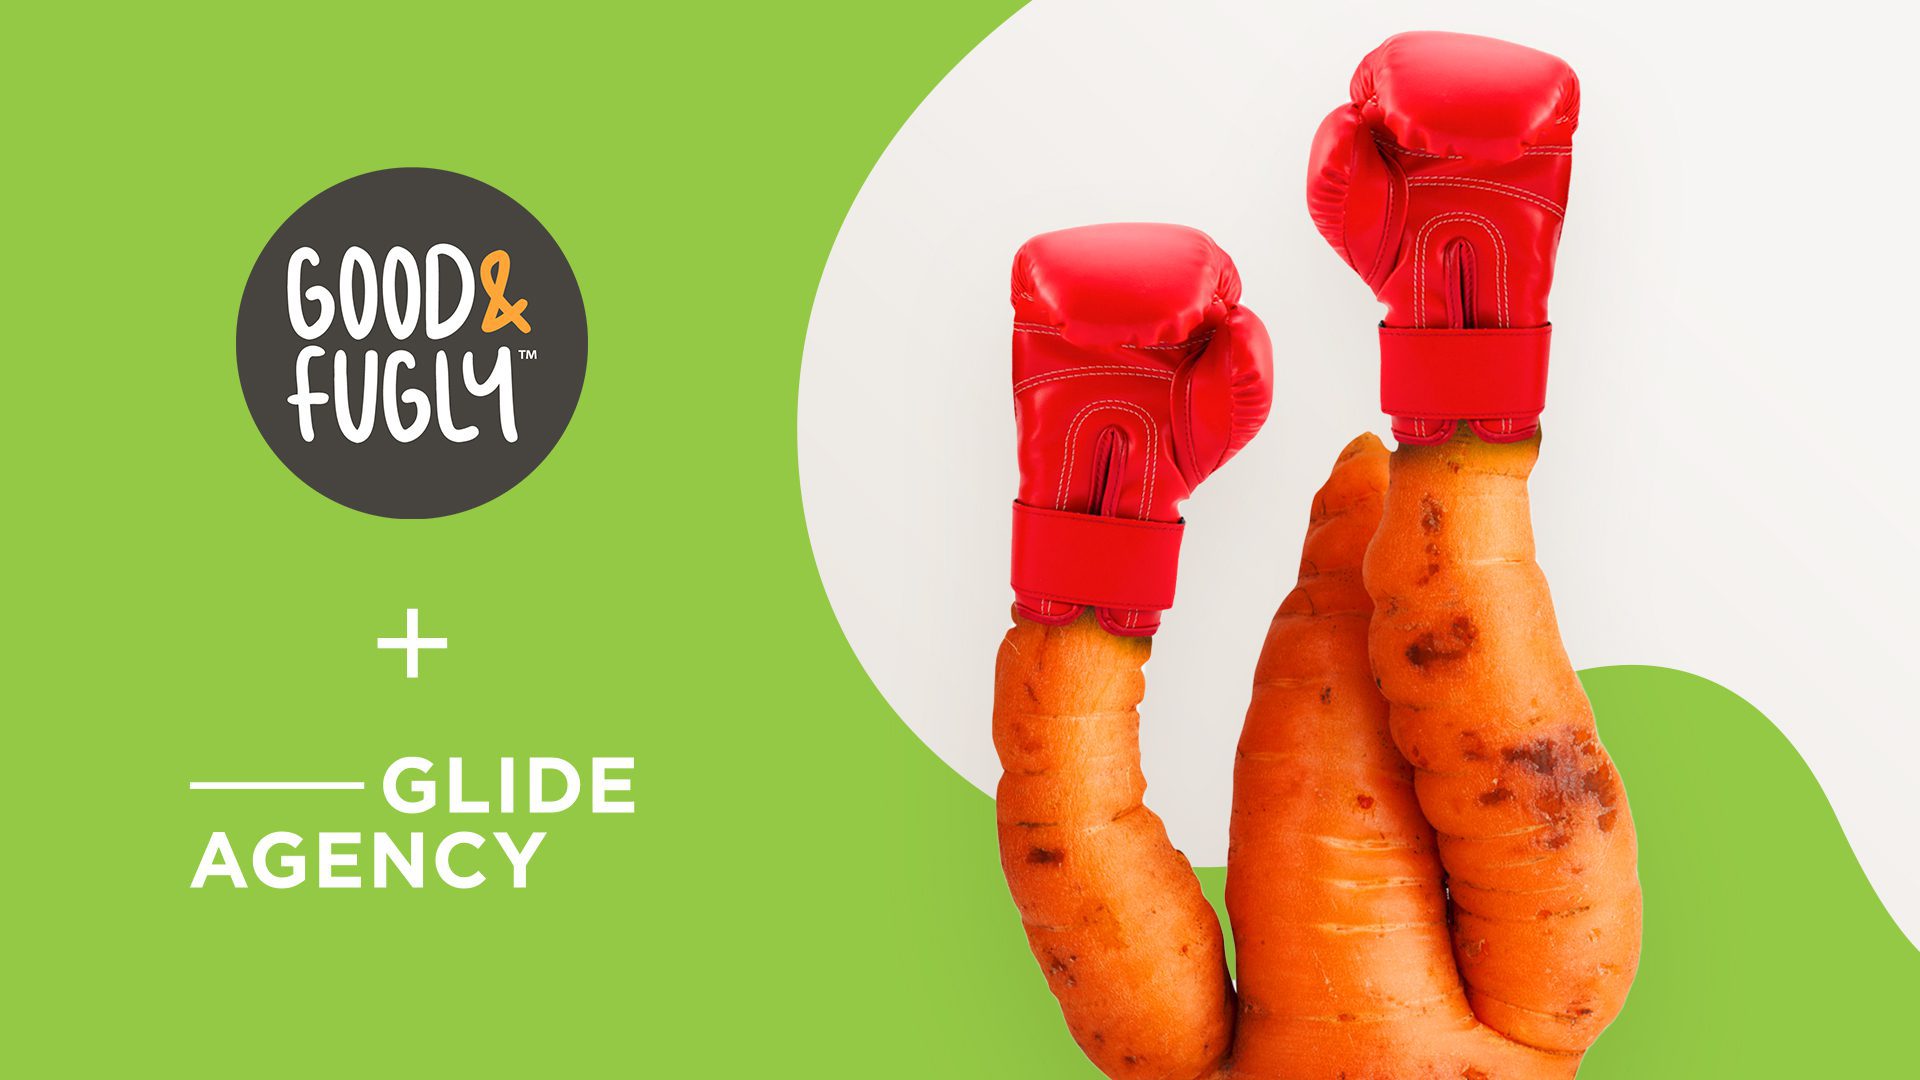 Good & Fugly partner up with Glide Agency to help fight food waste